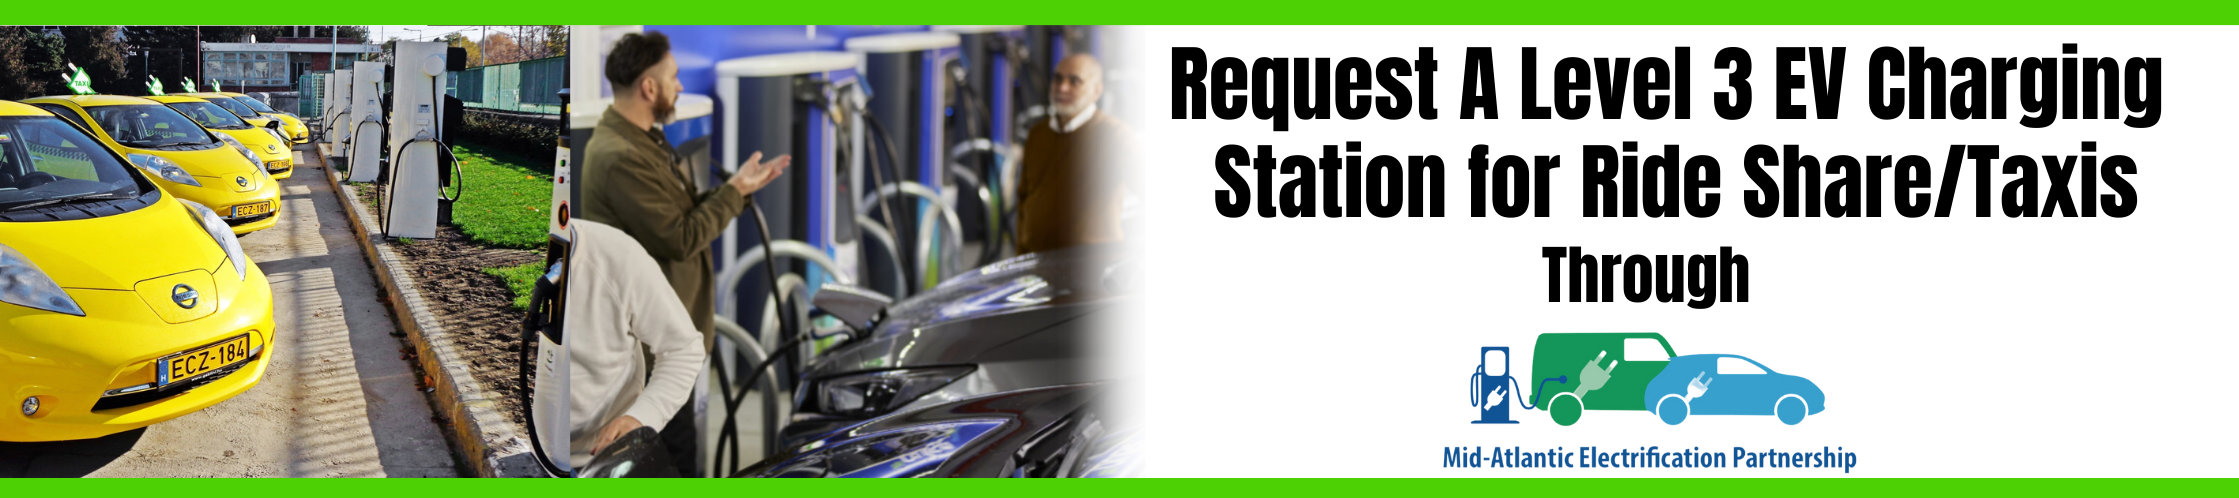 Request A Level 3 EV Charger Station